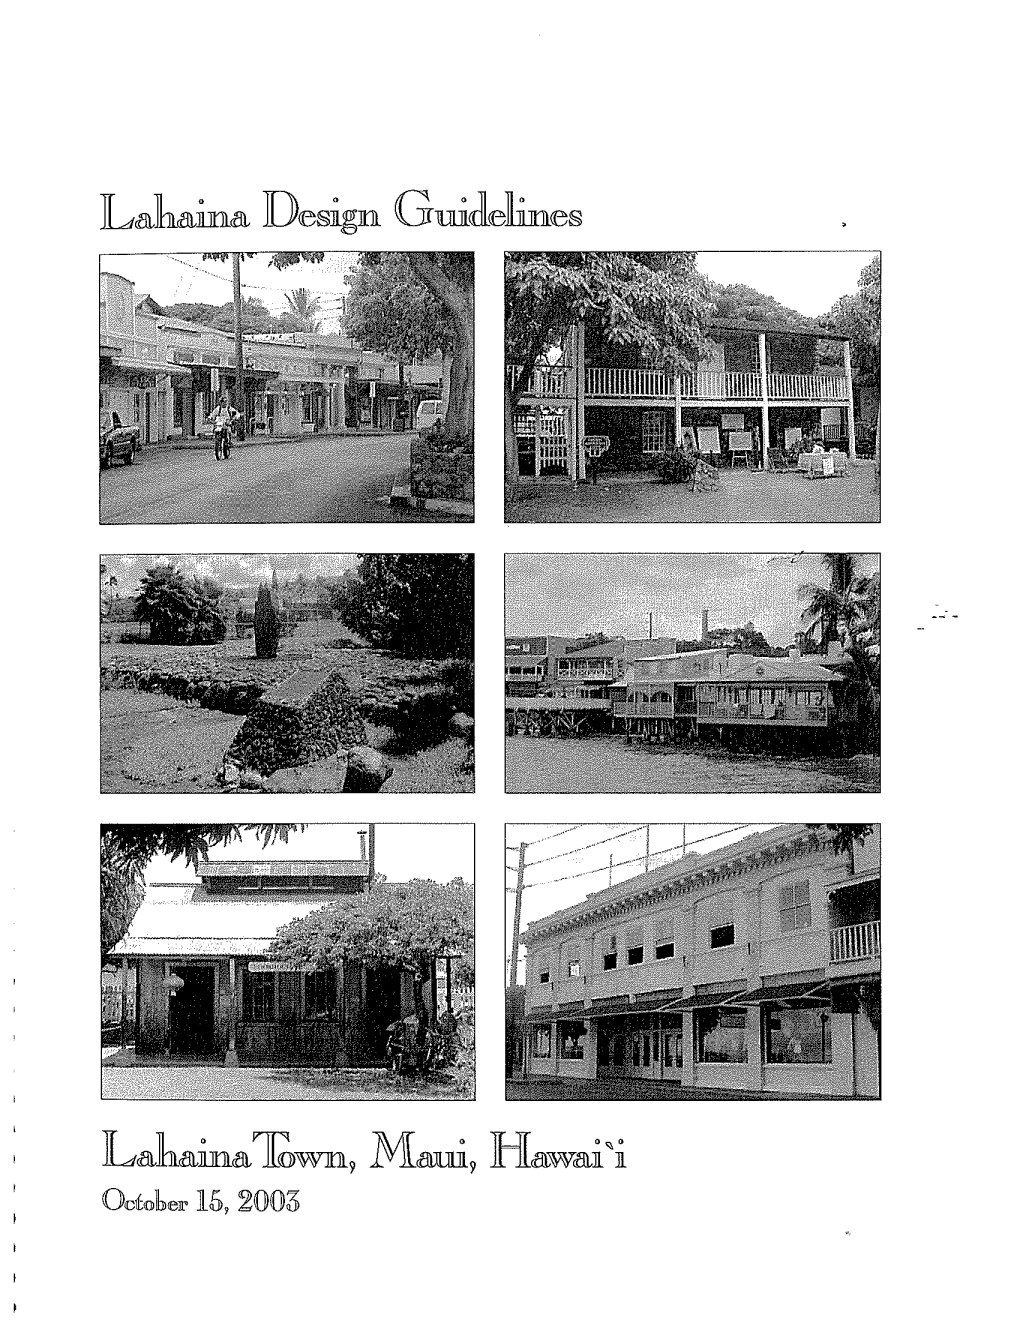 Design Guidelines for Lahaina Historic Districts